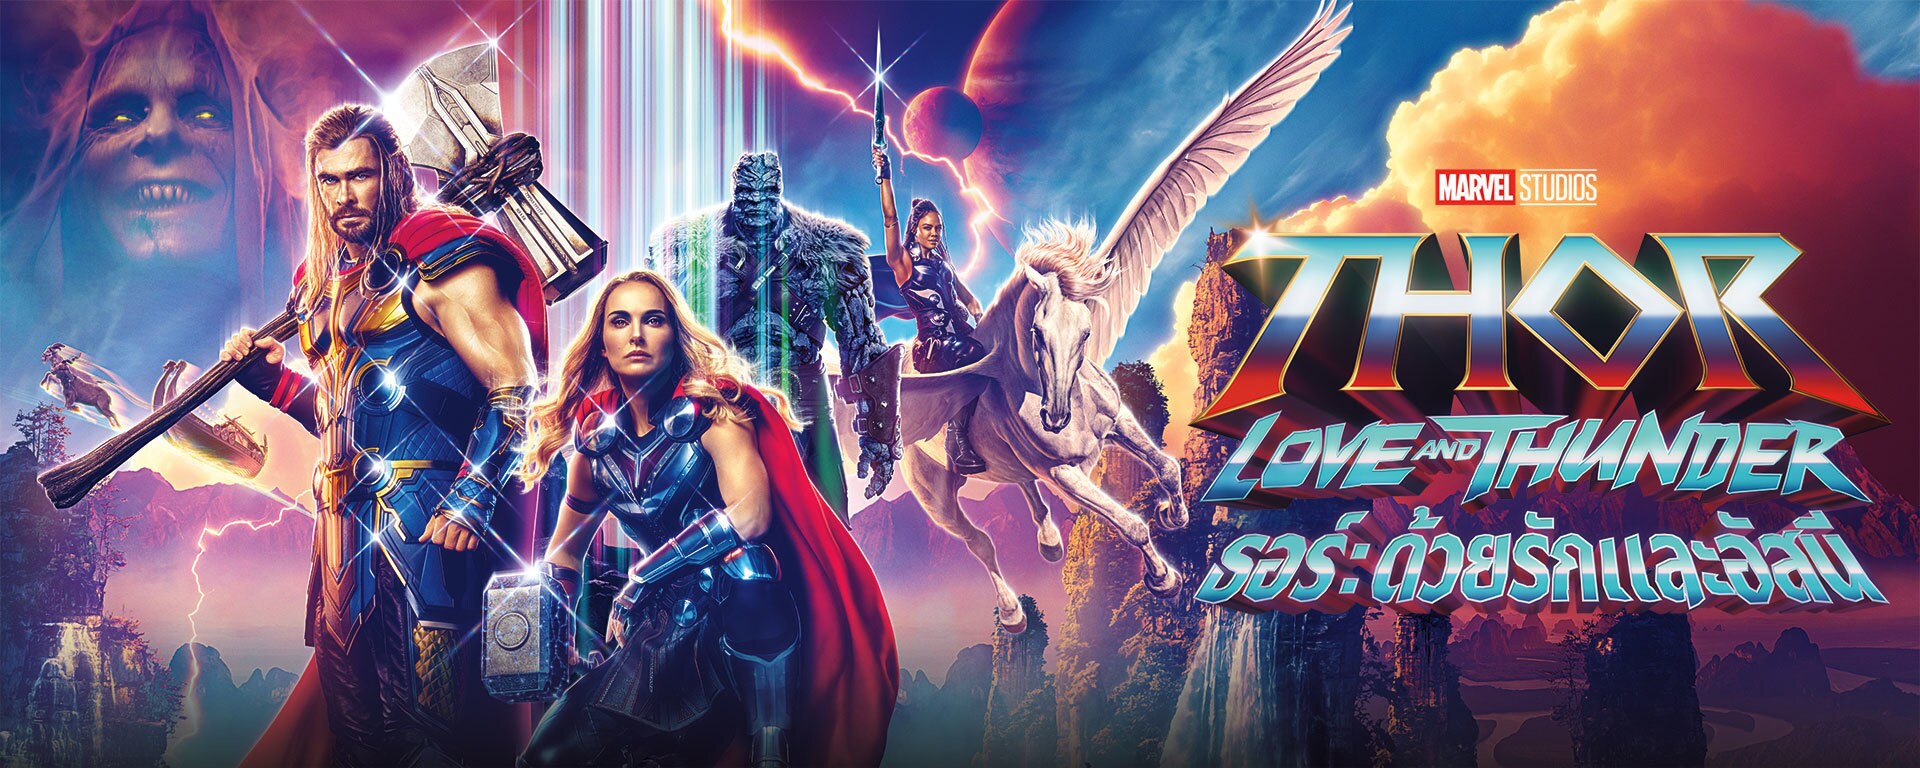 Marvel Studios' Thor: Love and Thunder - Featured Content Banner